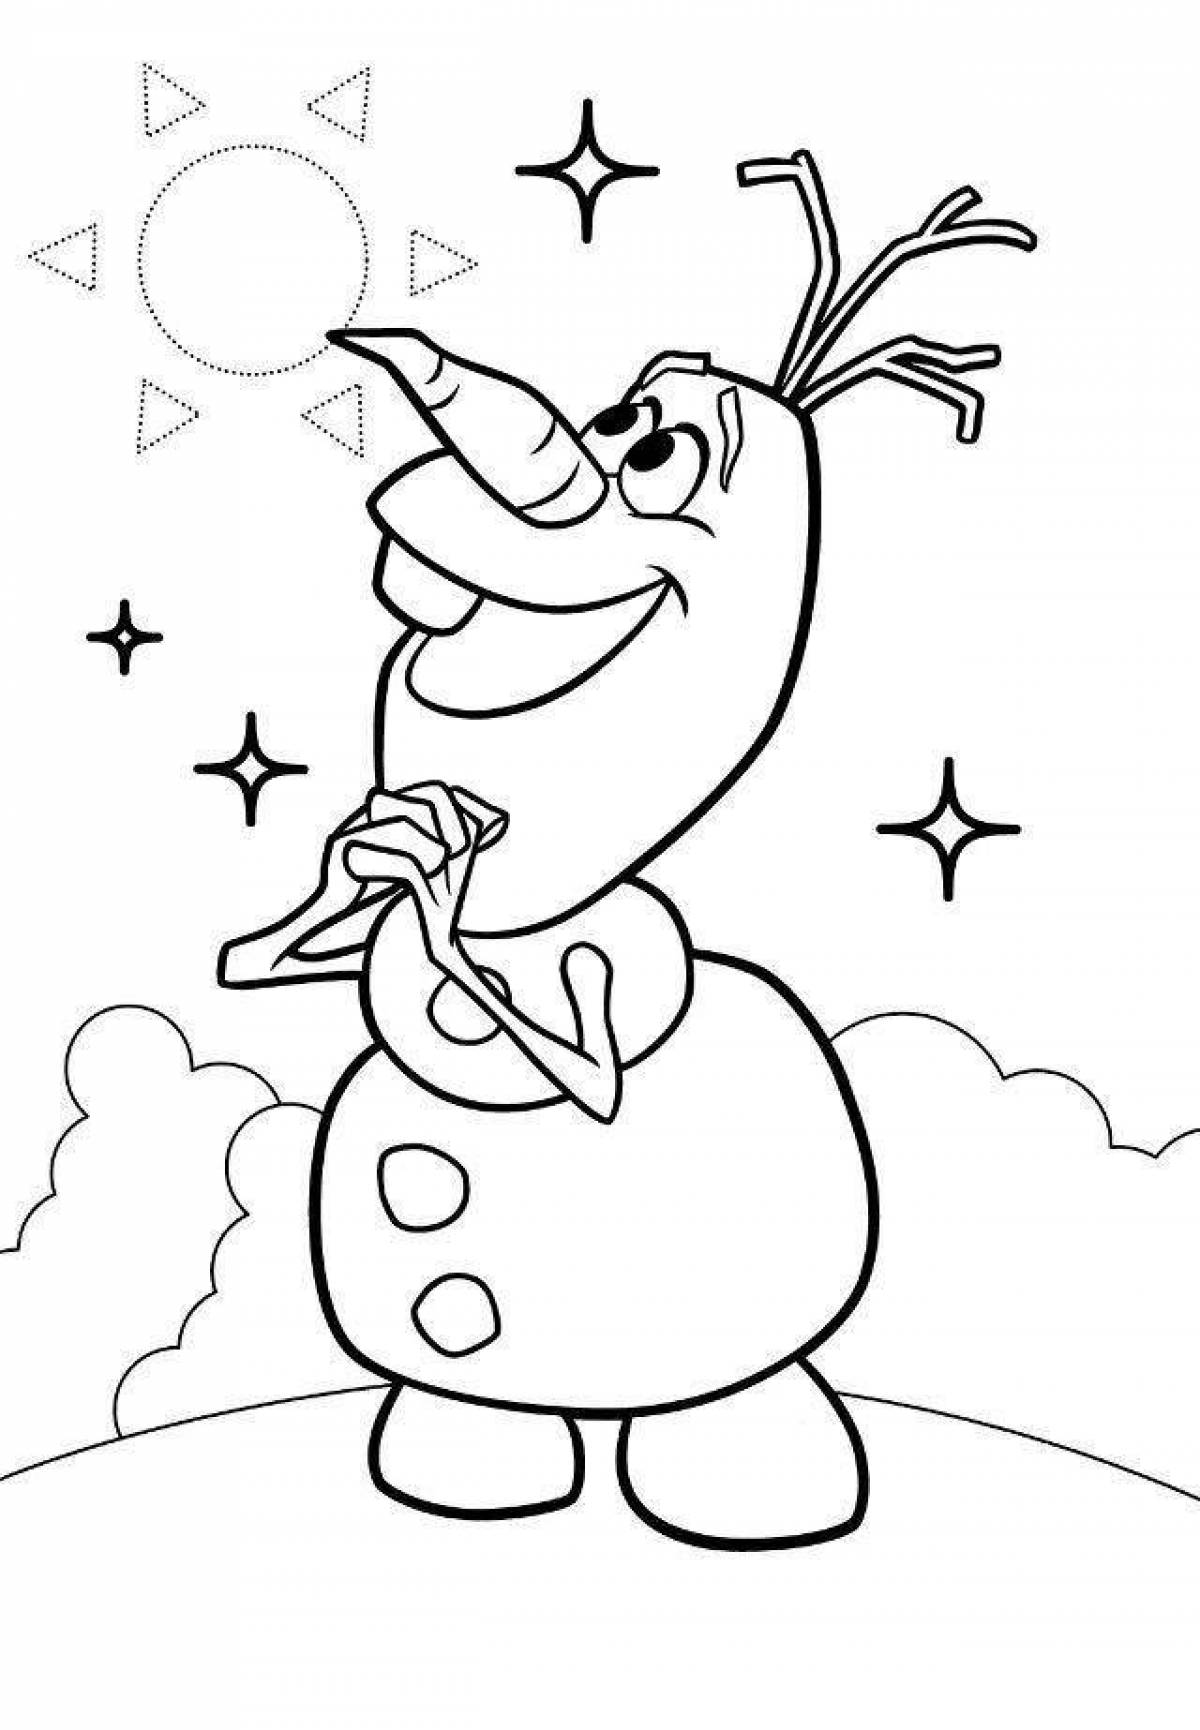 Olaf's funny snowman coloring book